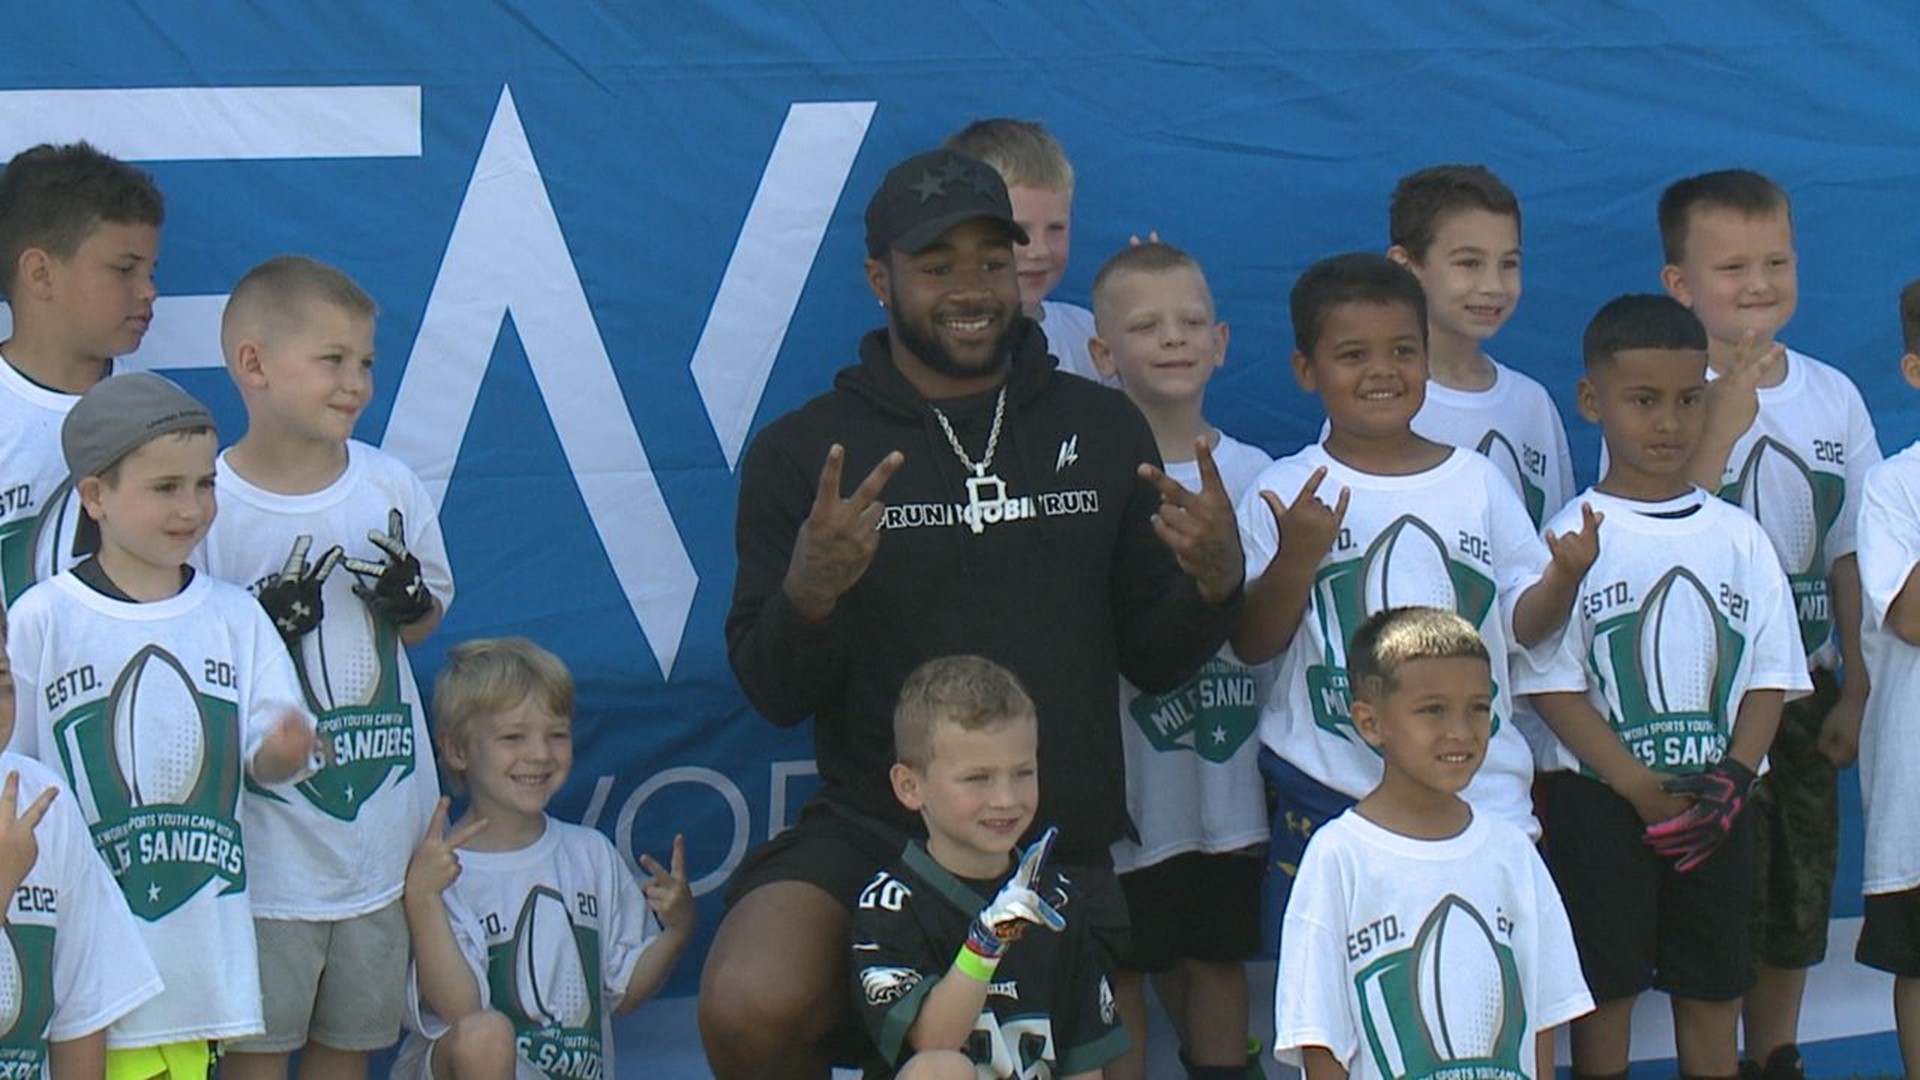 Eagles Running Back and Penn State Alum Miles Sanders Held a Youth Football Camp Sunday in Luzerne County